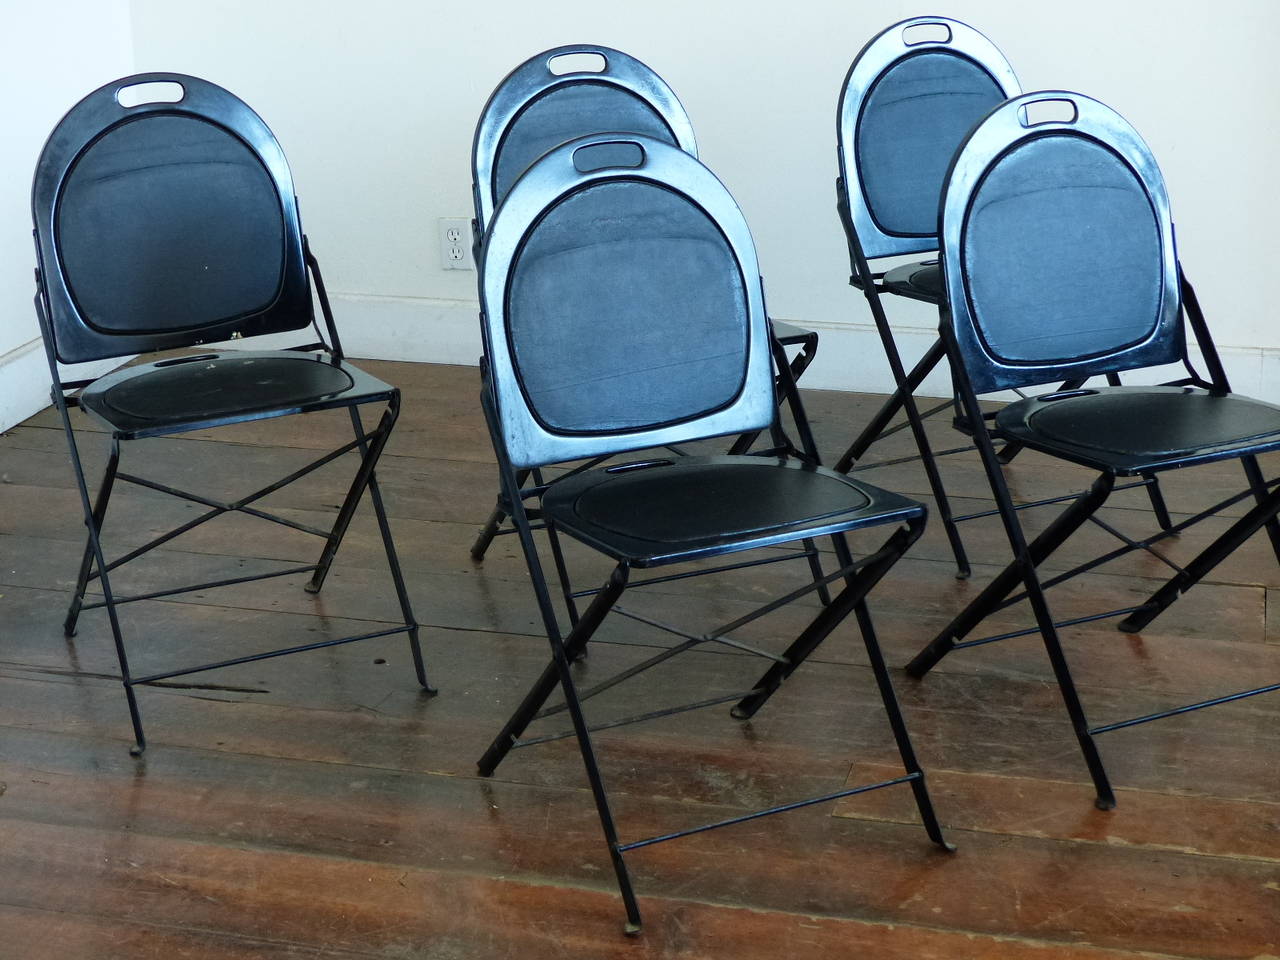 Set of ten folding metal chairs with panel seat in old leather. This set was manufactured by the Simmons furniture company.
Great condition